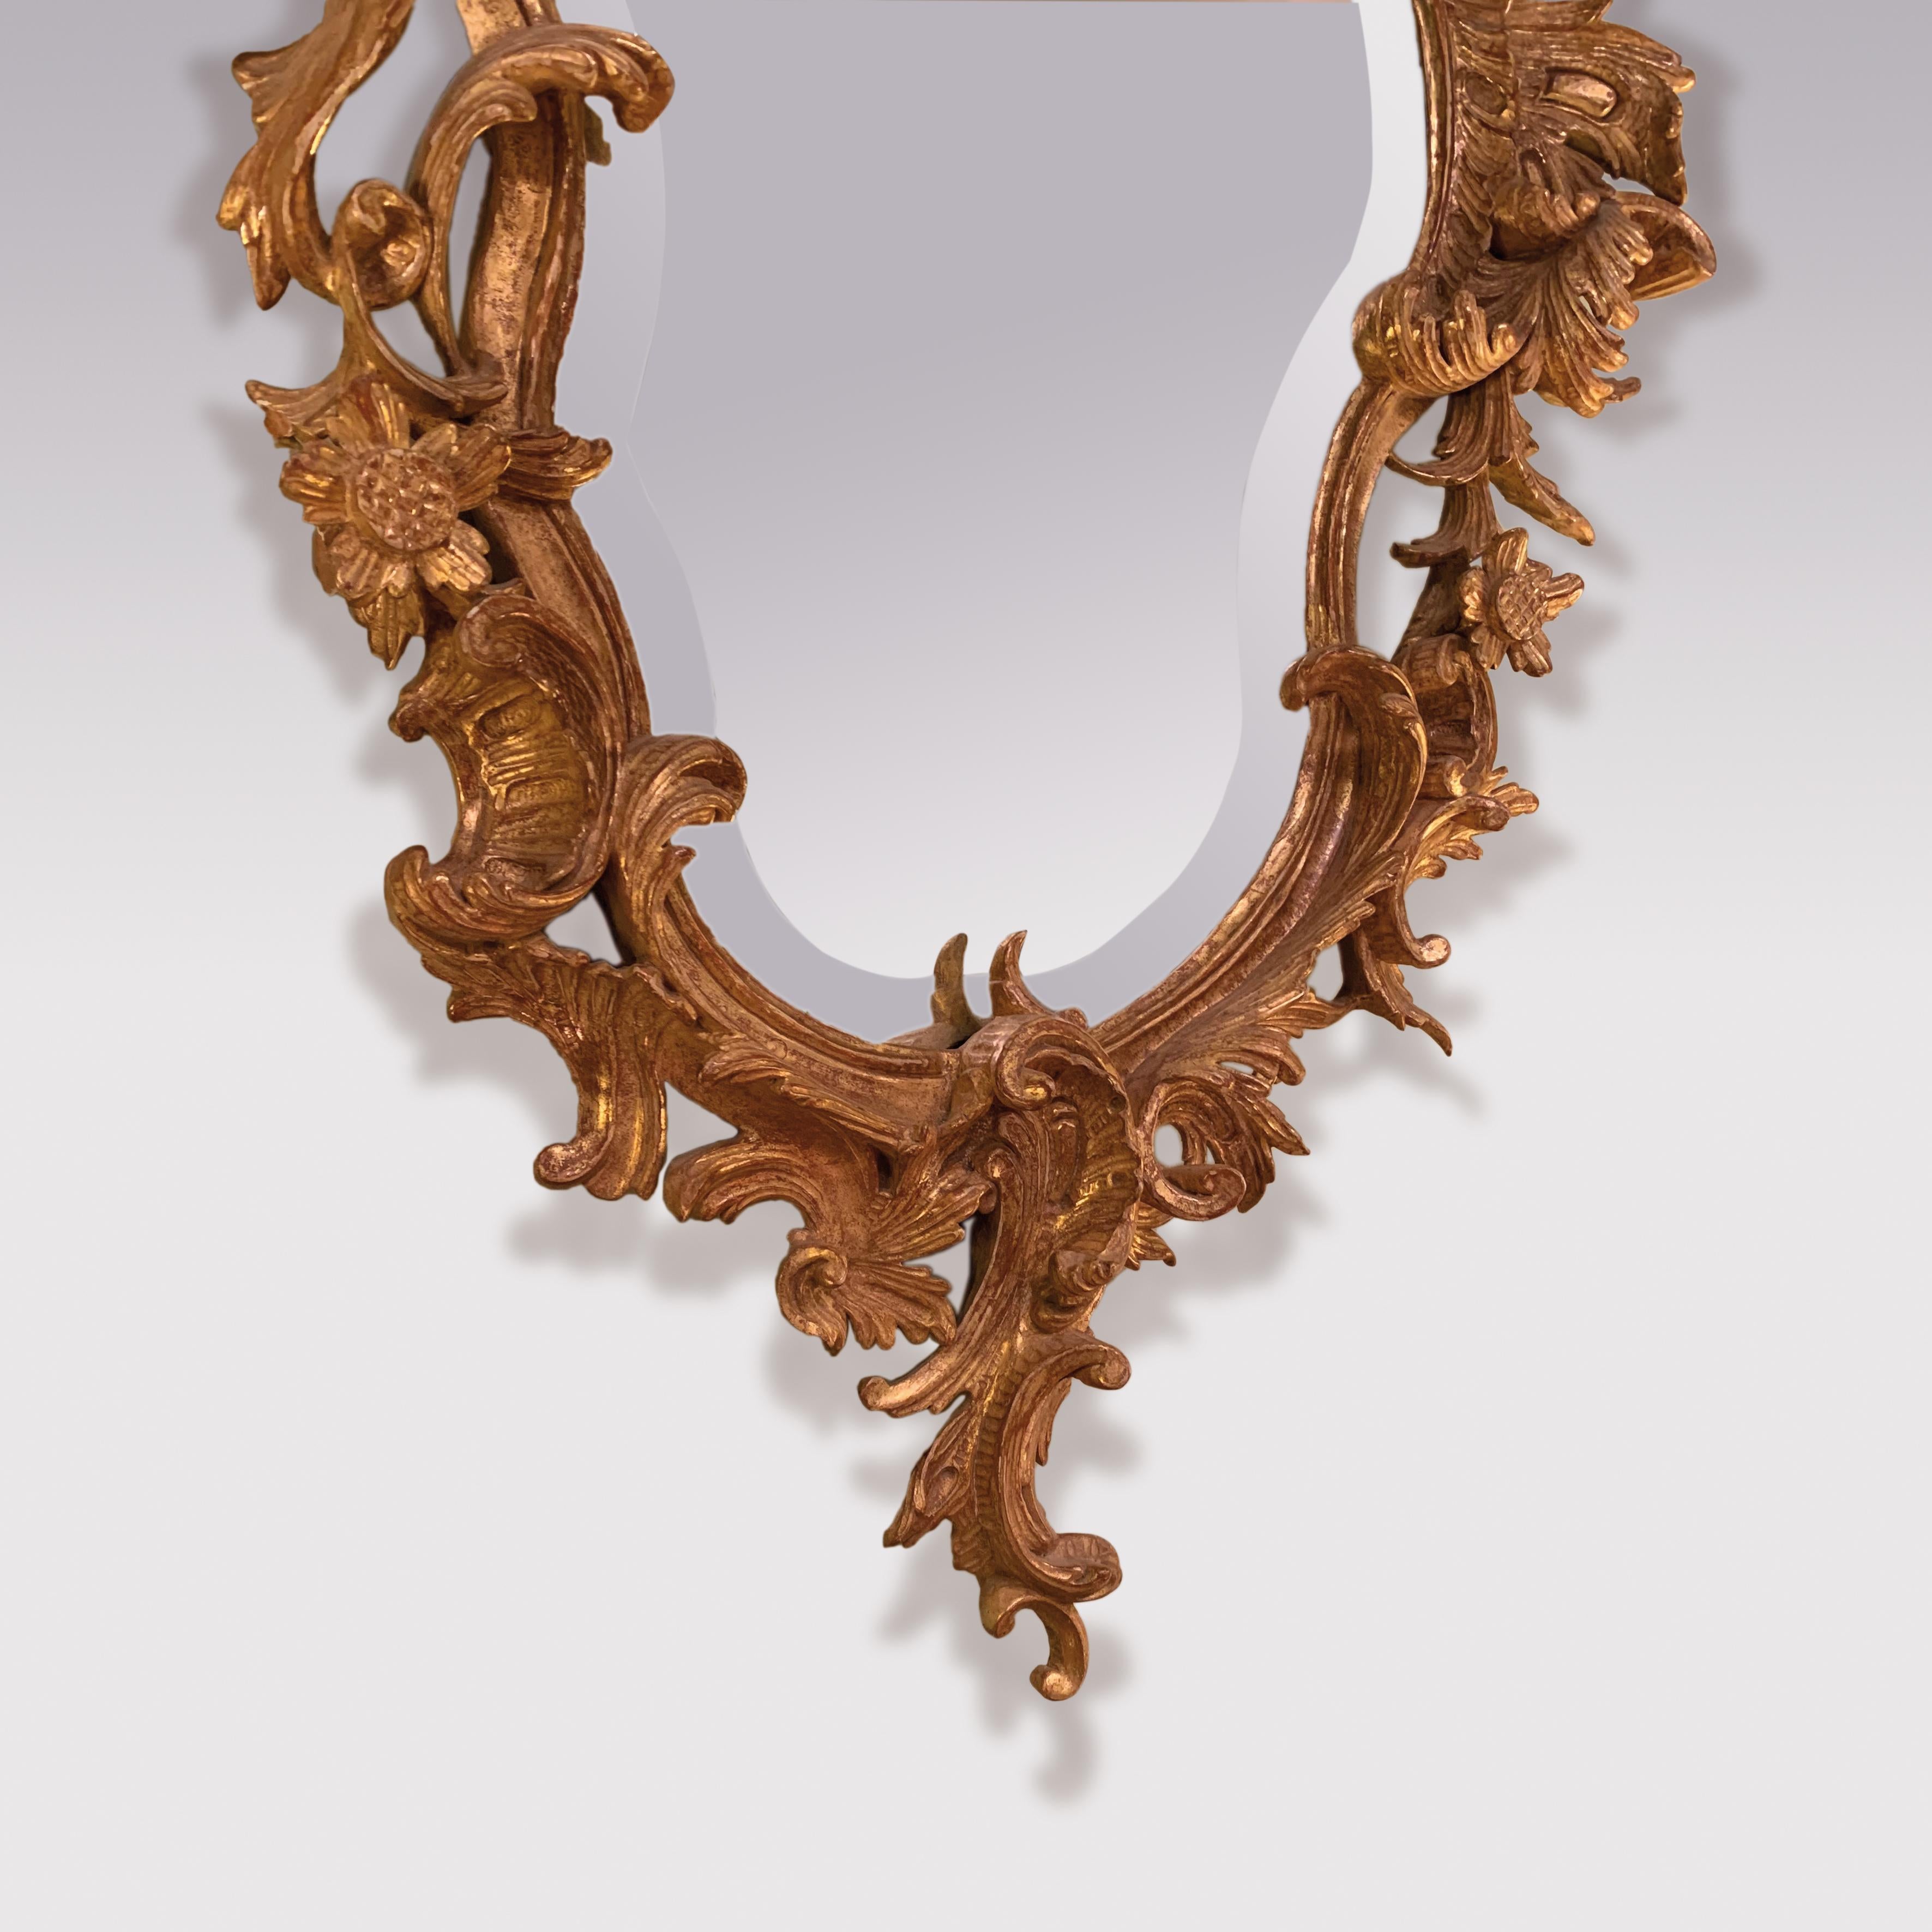 An attractive late 19th Century Italian girandole Mirror, crisply carved with “C” scrolls, flowers and foliage, retaining original bevelled mirror plate.